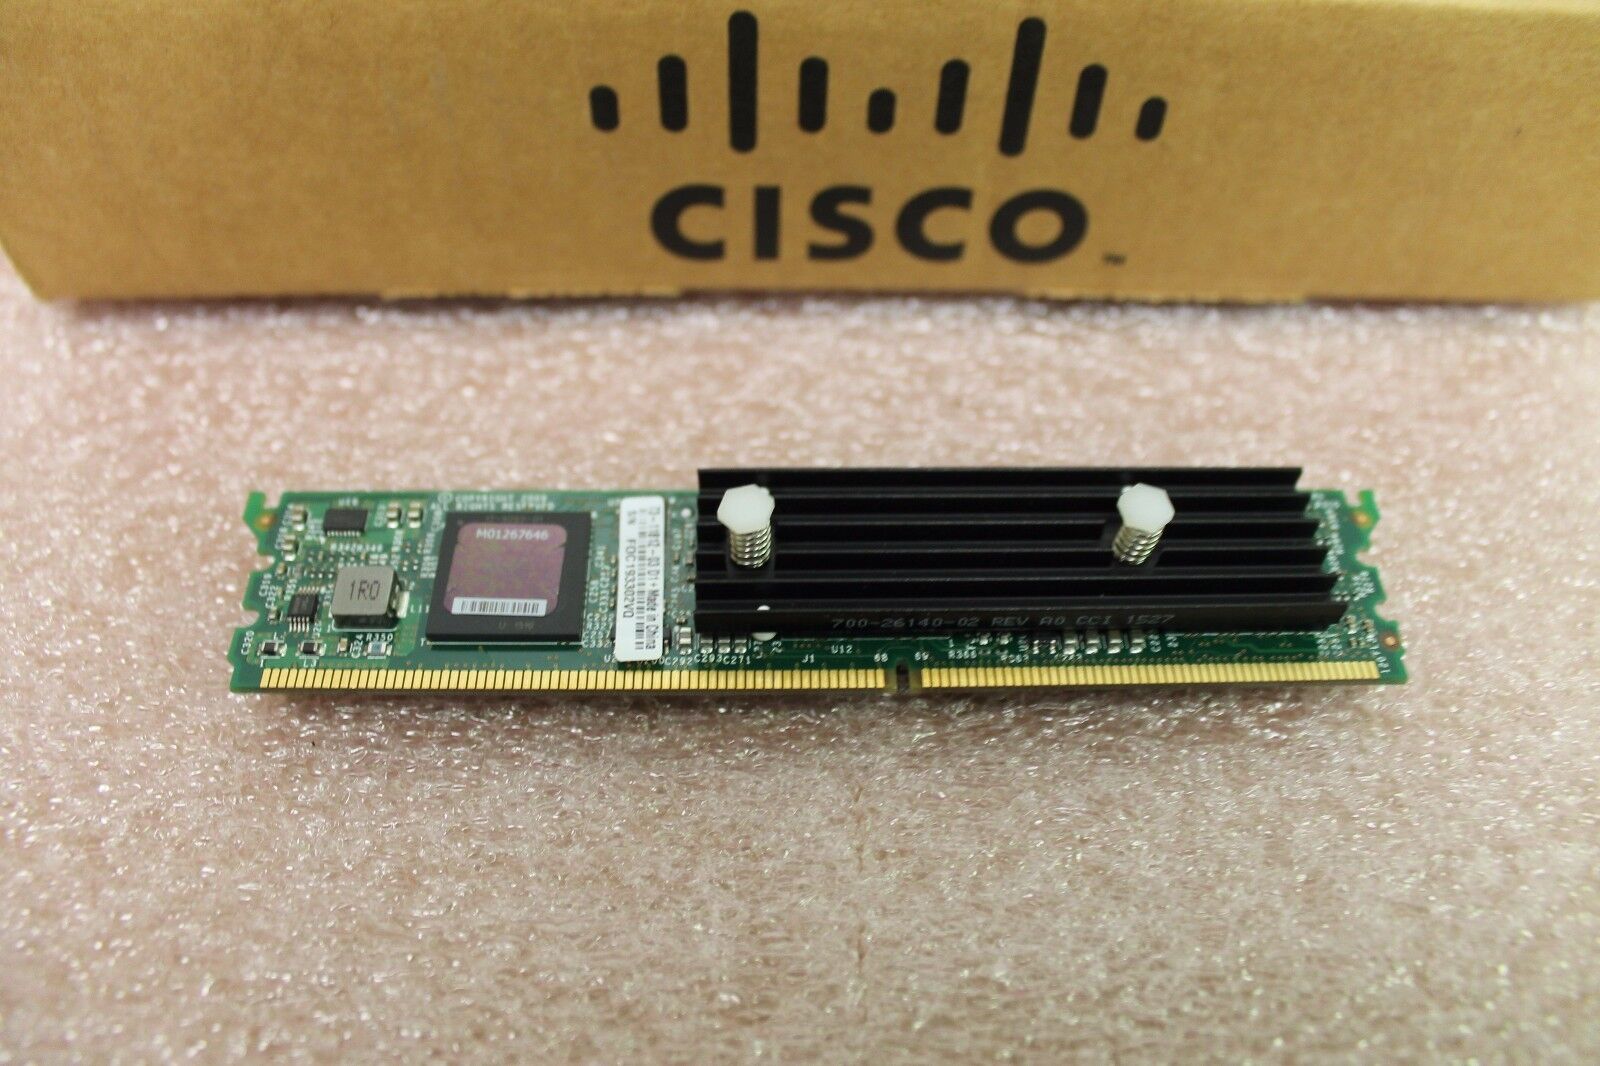 Cisco PVDM3-256 256-channel high-density voice and video DSP module